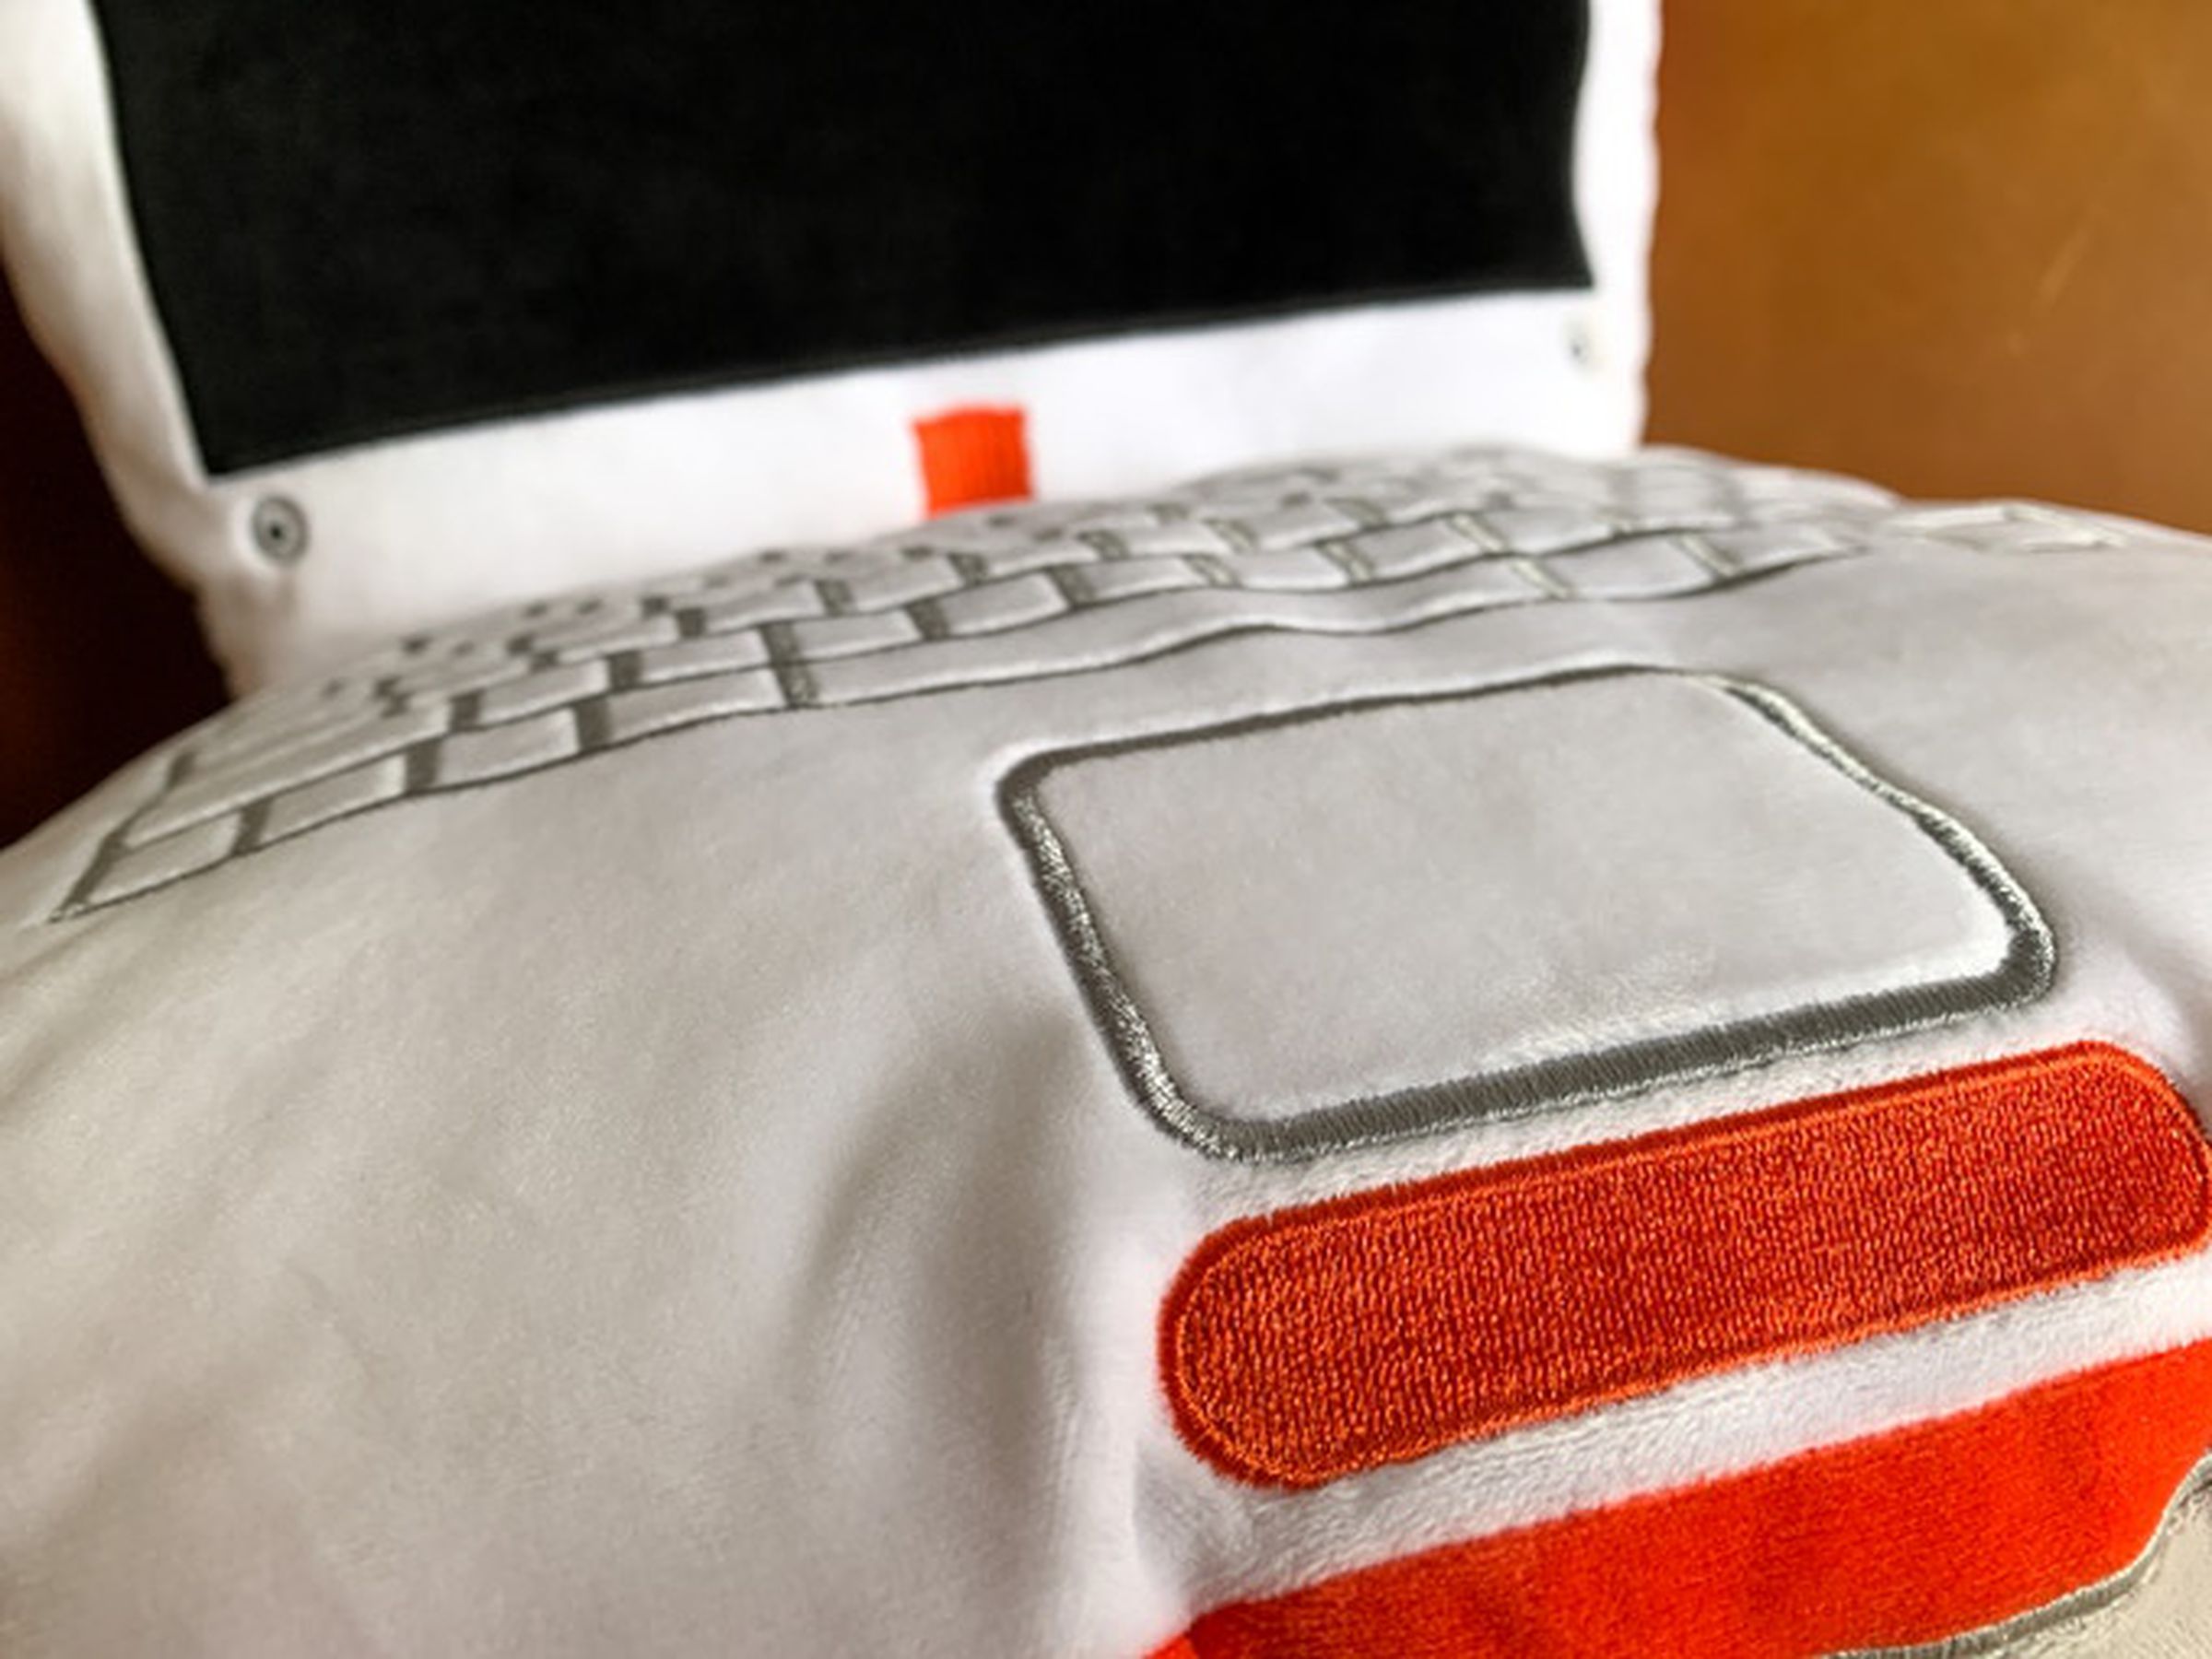 This is the only time a keyboard feeling pillowy is a good thing.